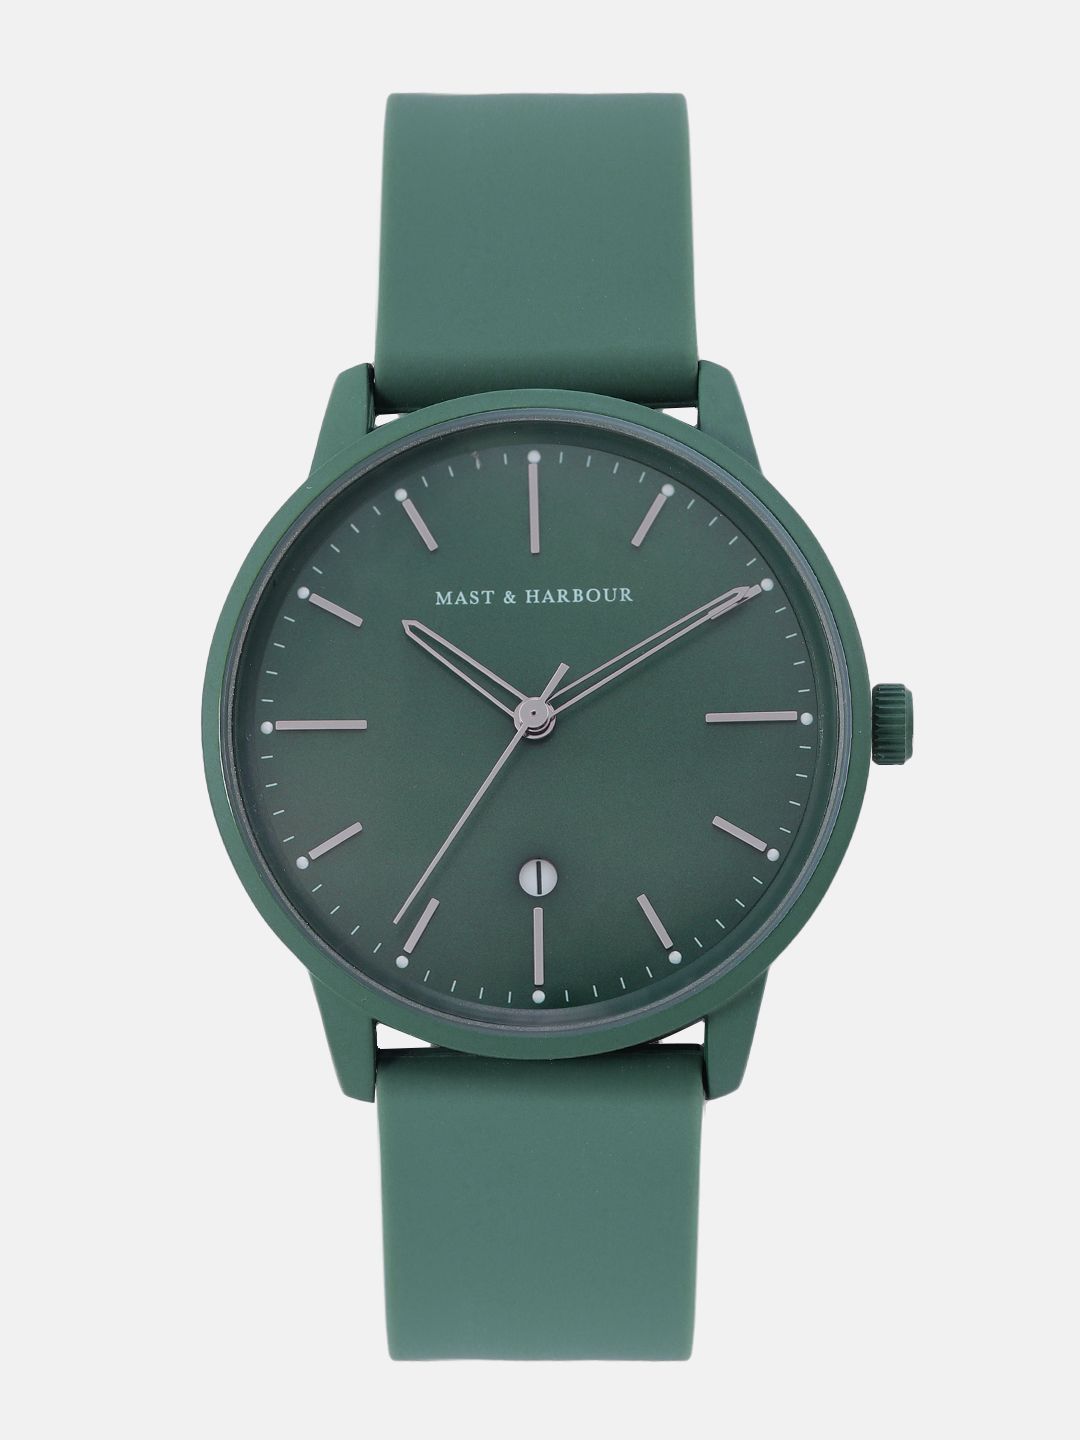 Mast & Harbour Unisex Green Analogue Watch MFB-PN-PF-DK2749 Price in India